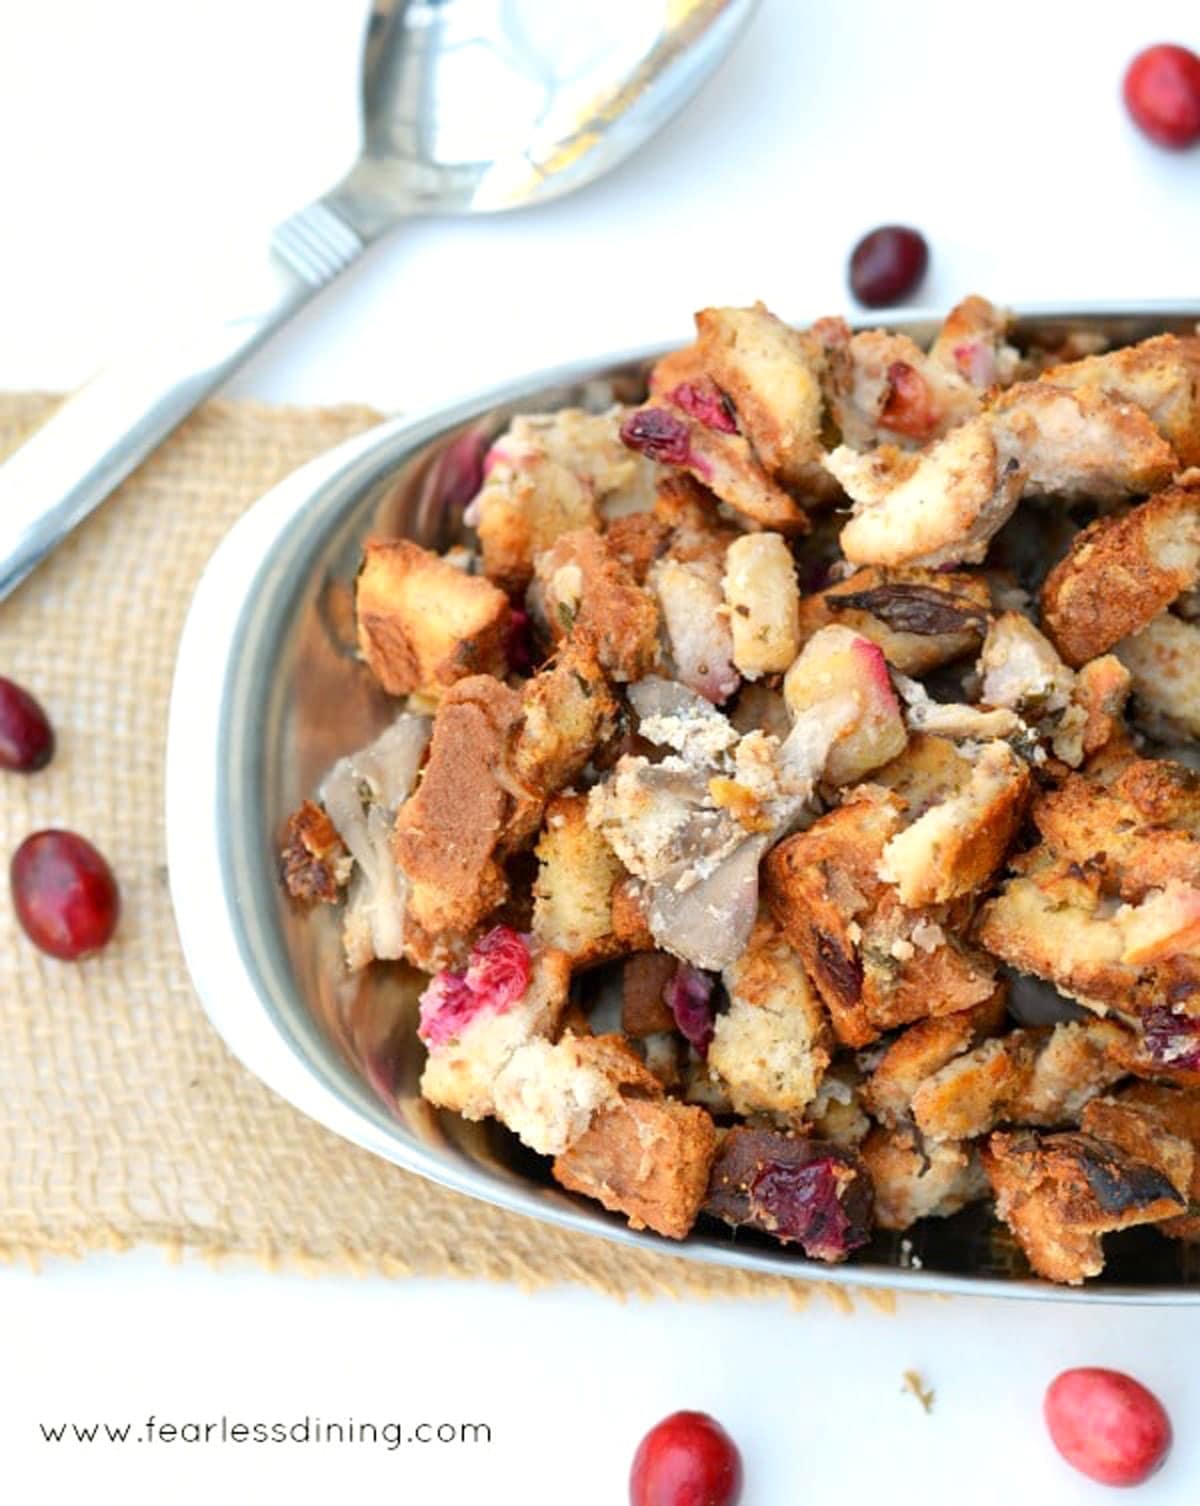 Cranberry stuffing in a silver serving bowl.